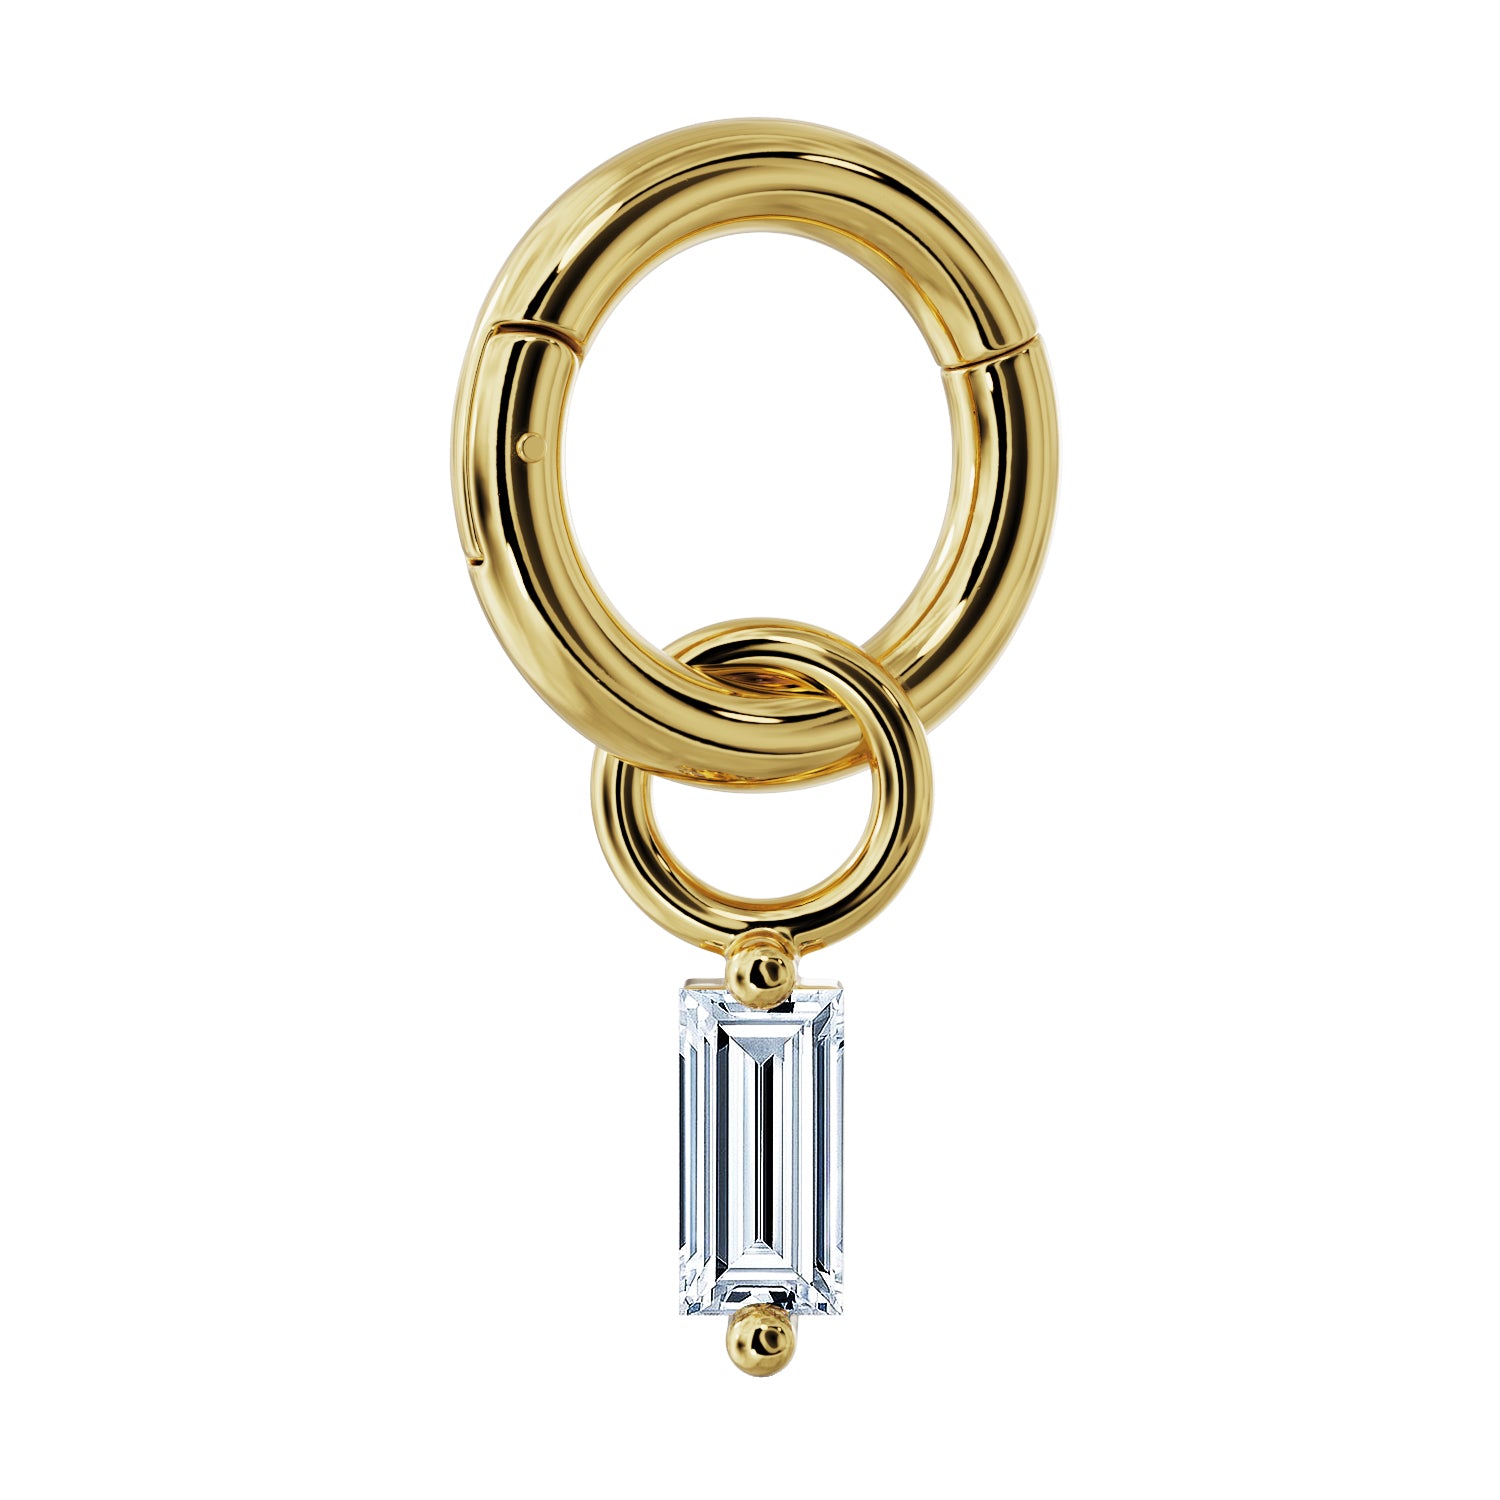 Clicker Ring & 14k Gold Sleek Baguette Diamond Charm Accessory for Piercing Jewelry